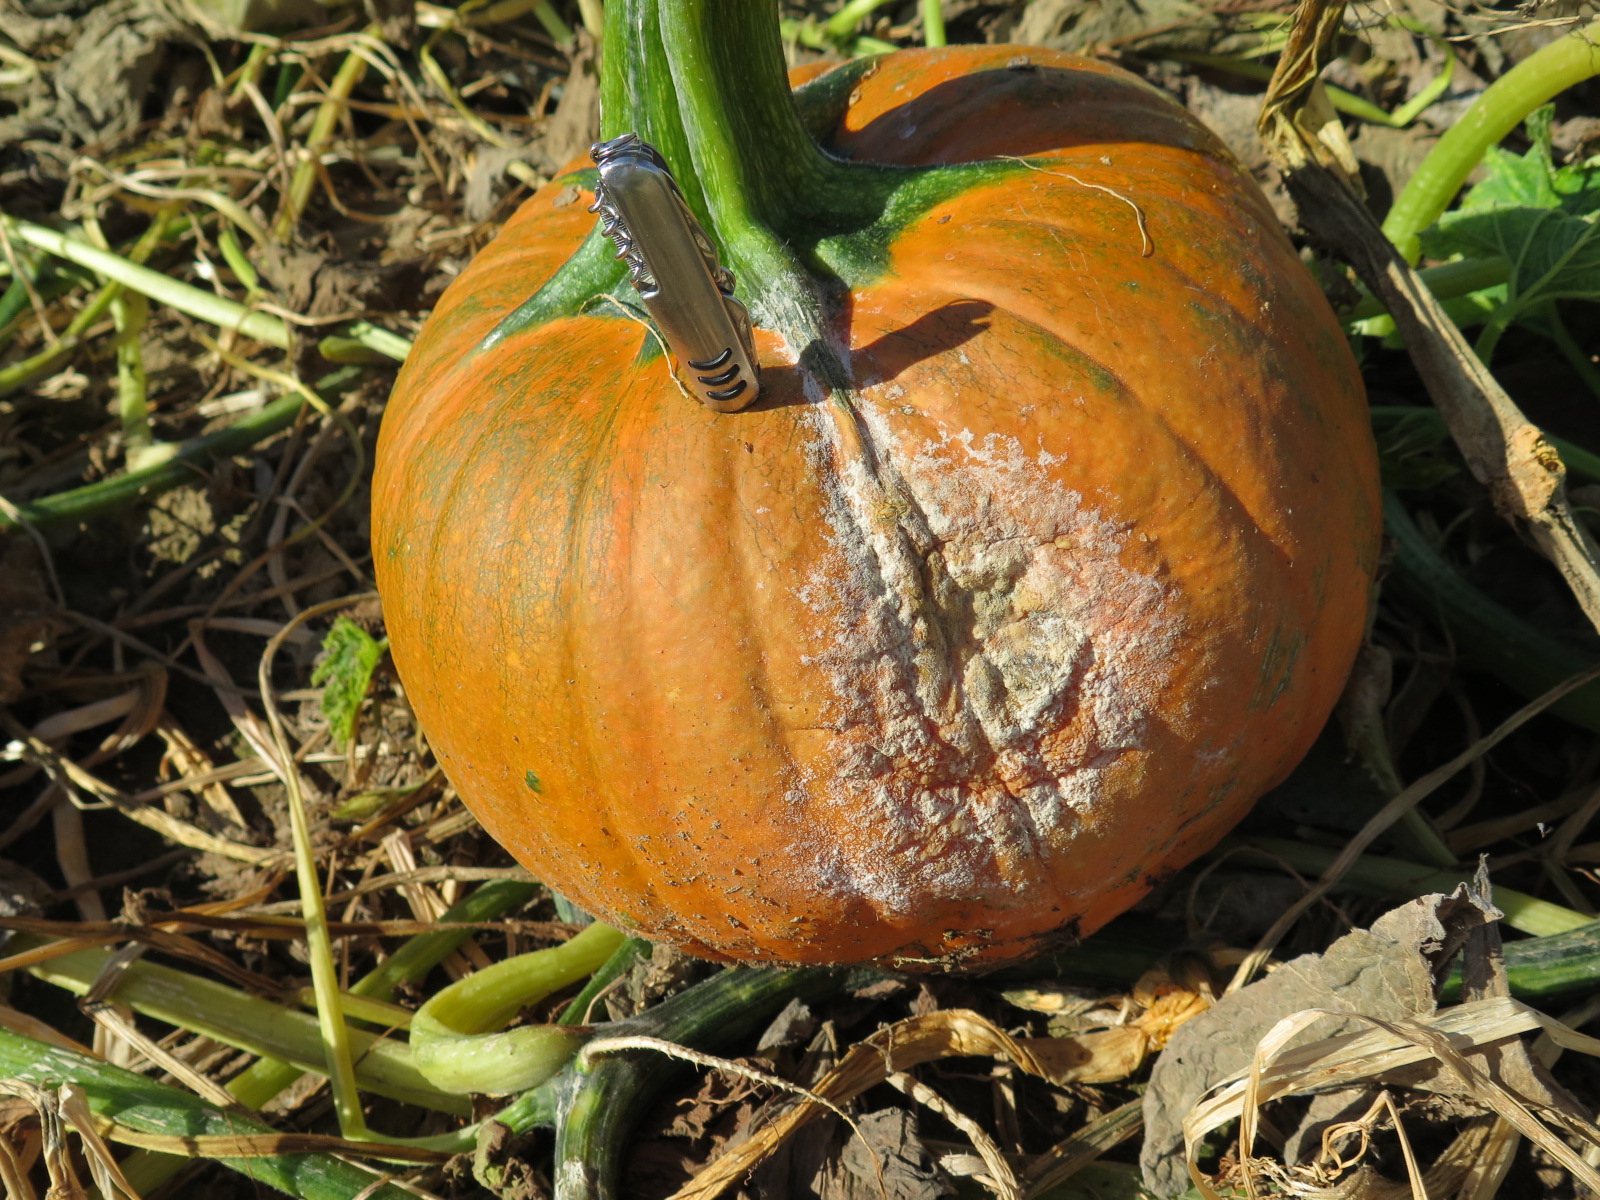  Phytophthora fruit rot of pumpkin.